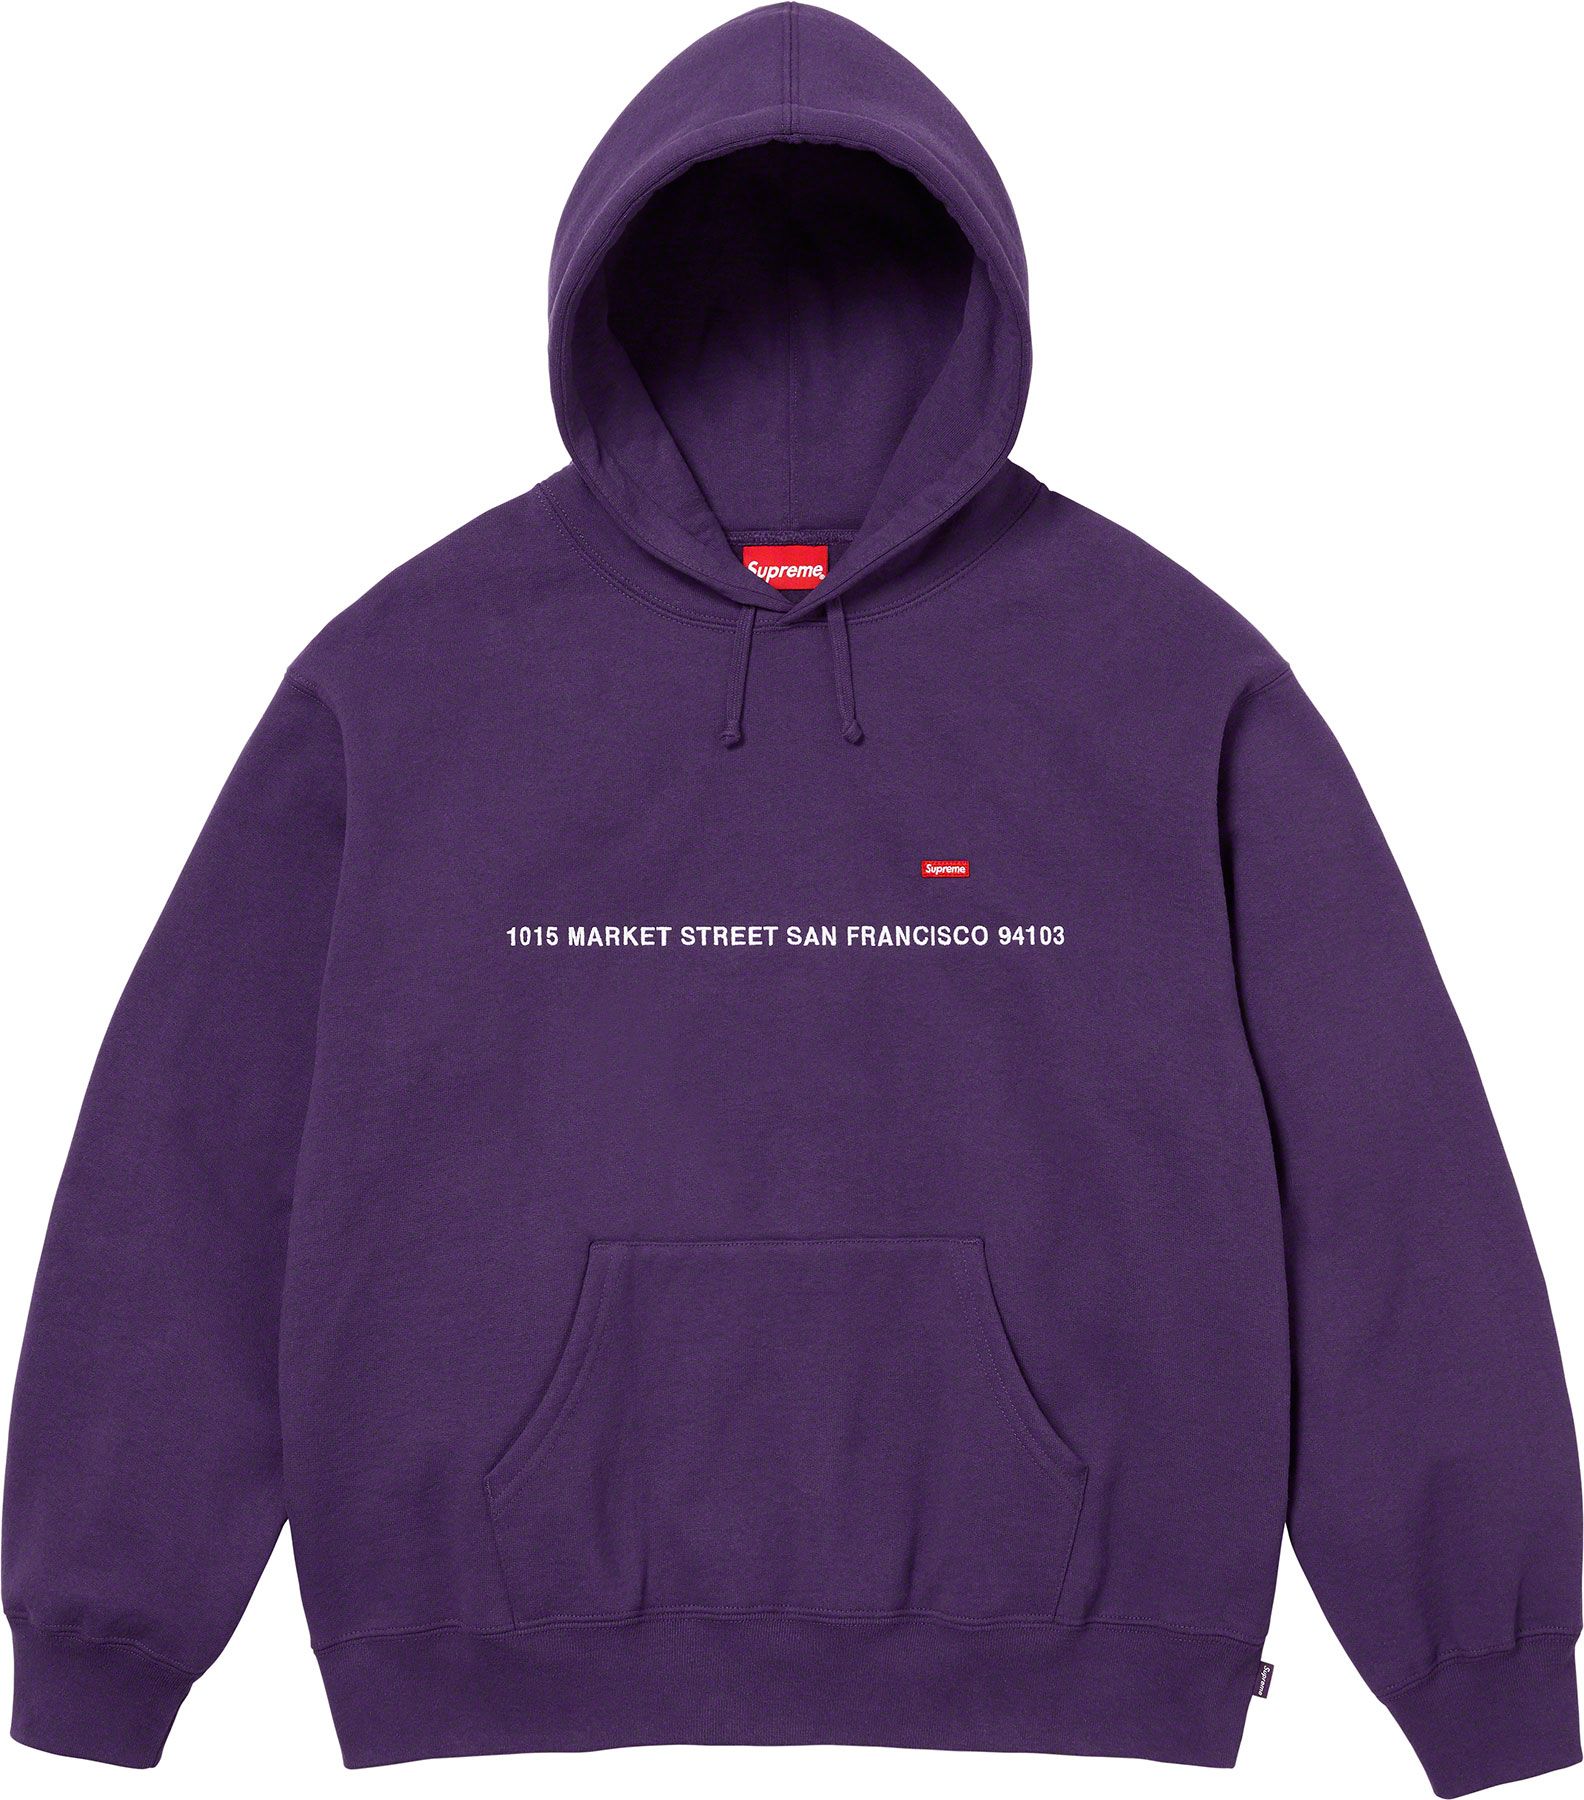 Small Box Zip Up Hooded Sweatshirt - Fall/Winter 2023 Preview 